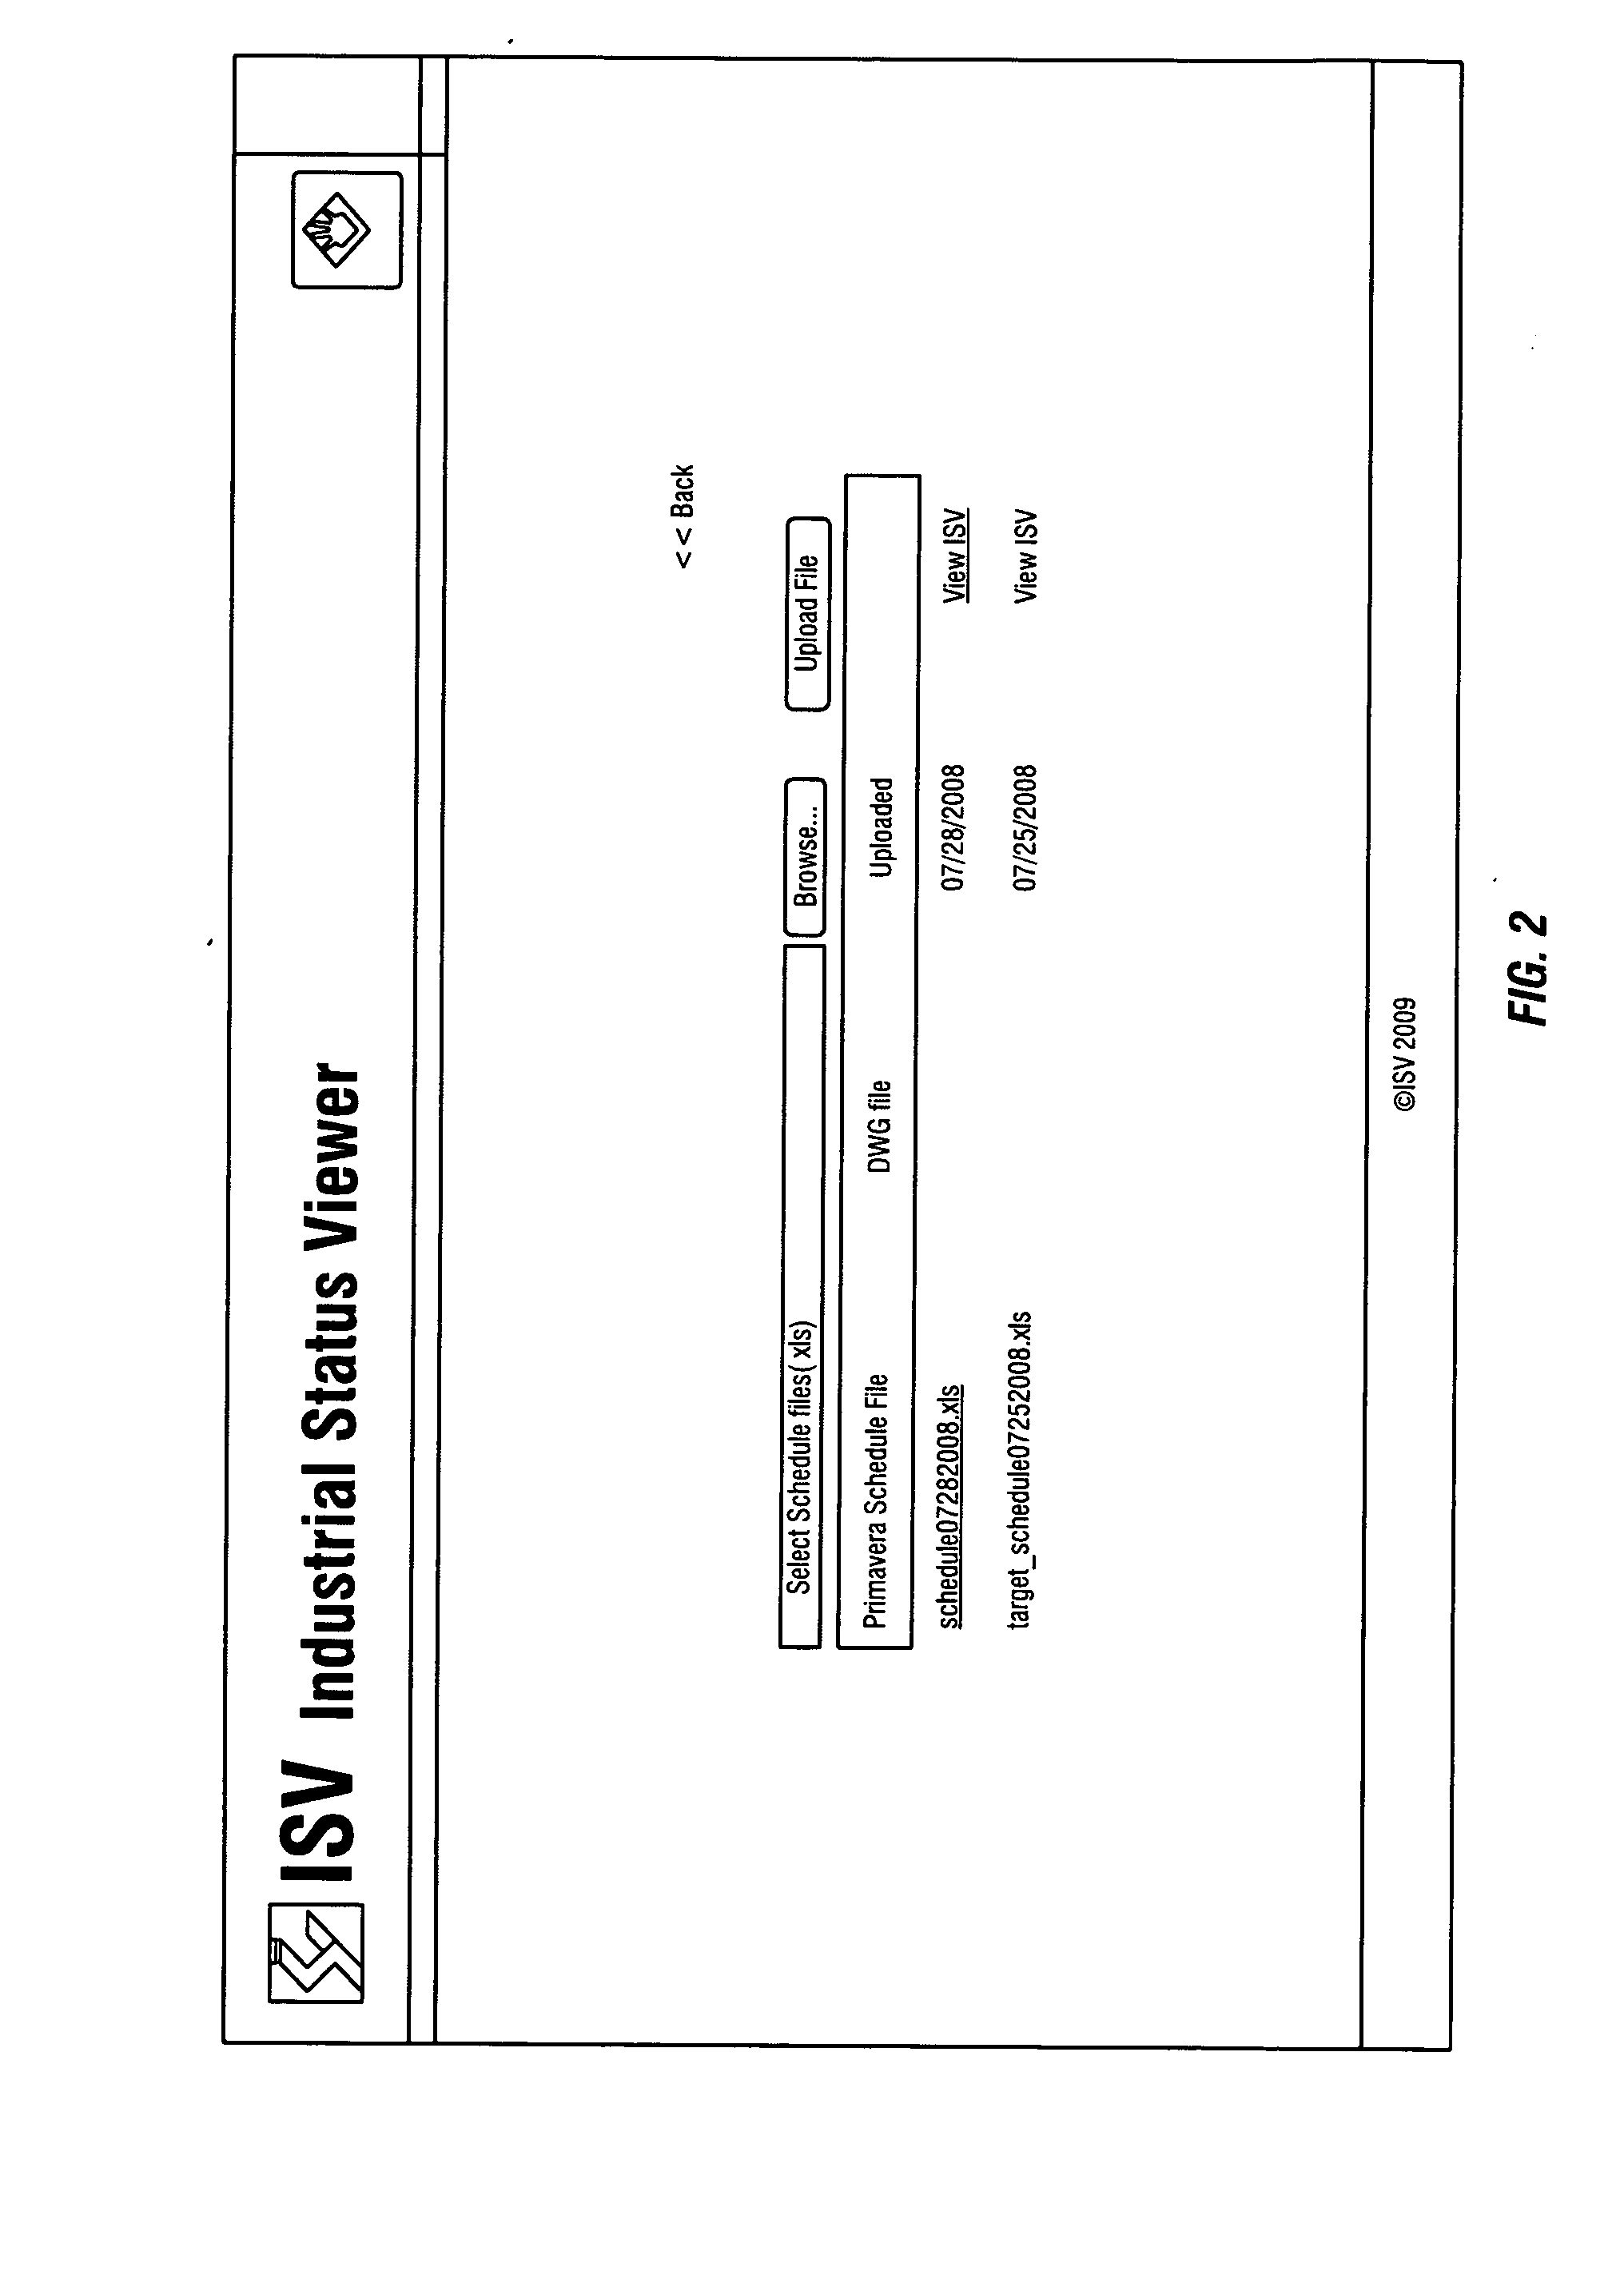 Industrial status viewer system and method